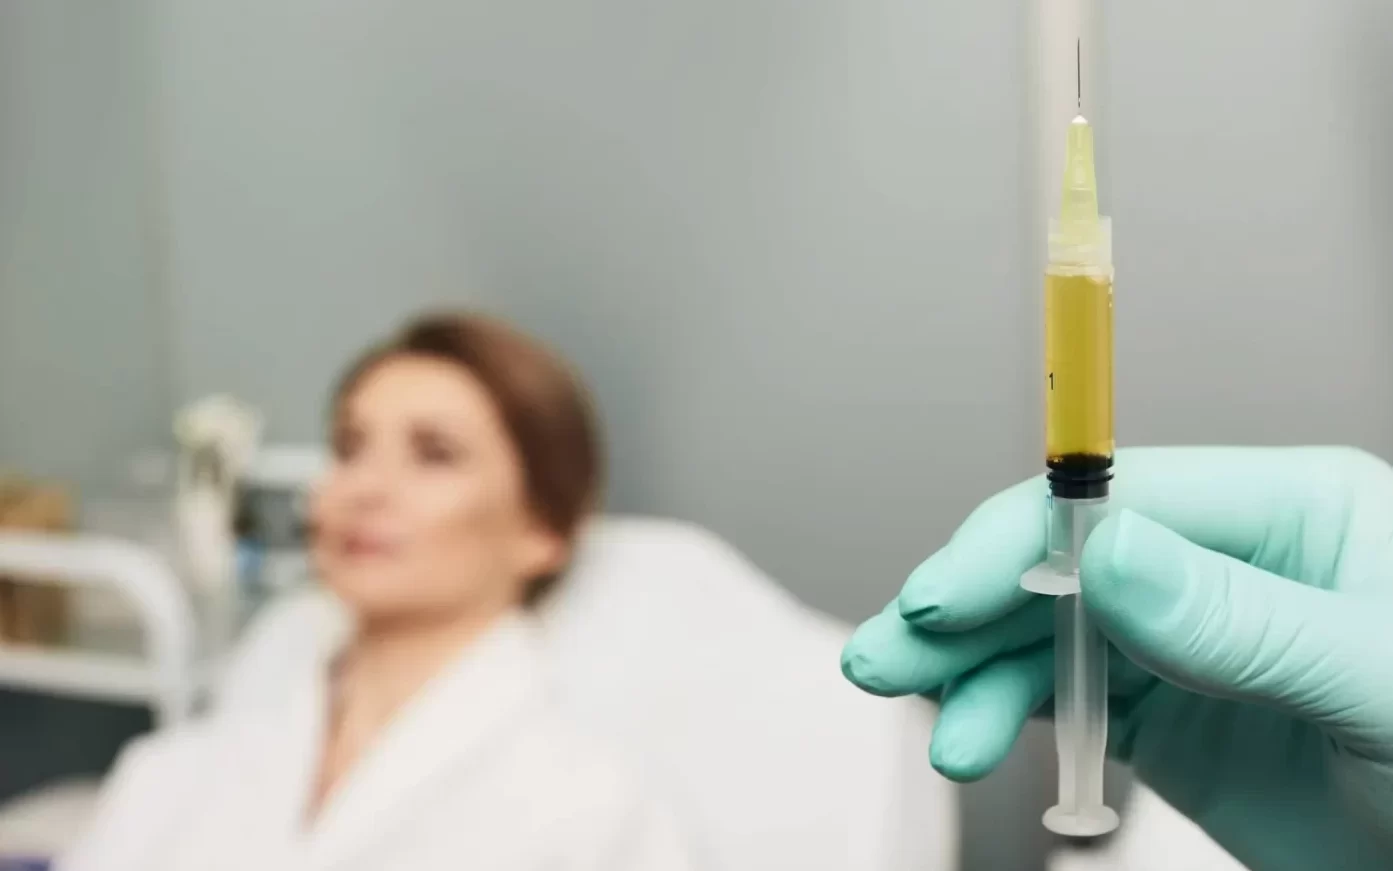 Syringe with a patient's blood plasma in a cosmetologist's hand